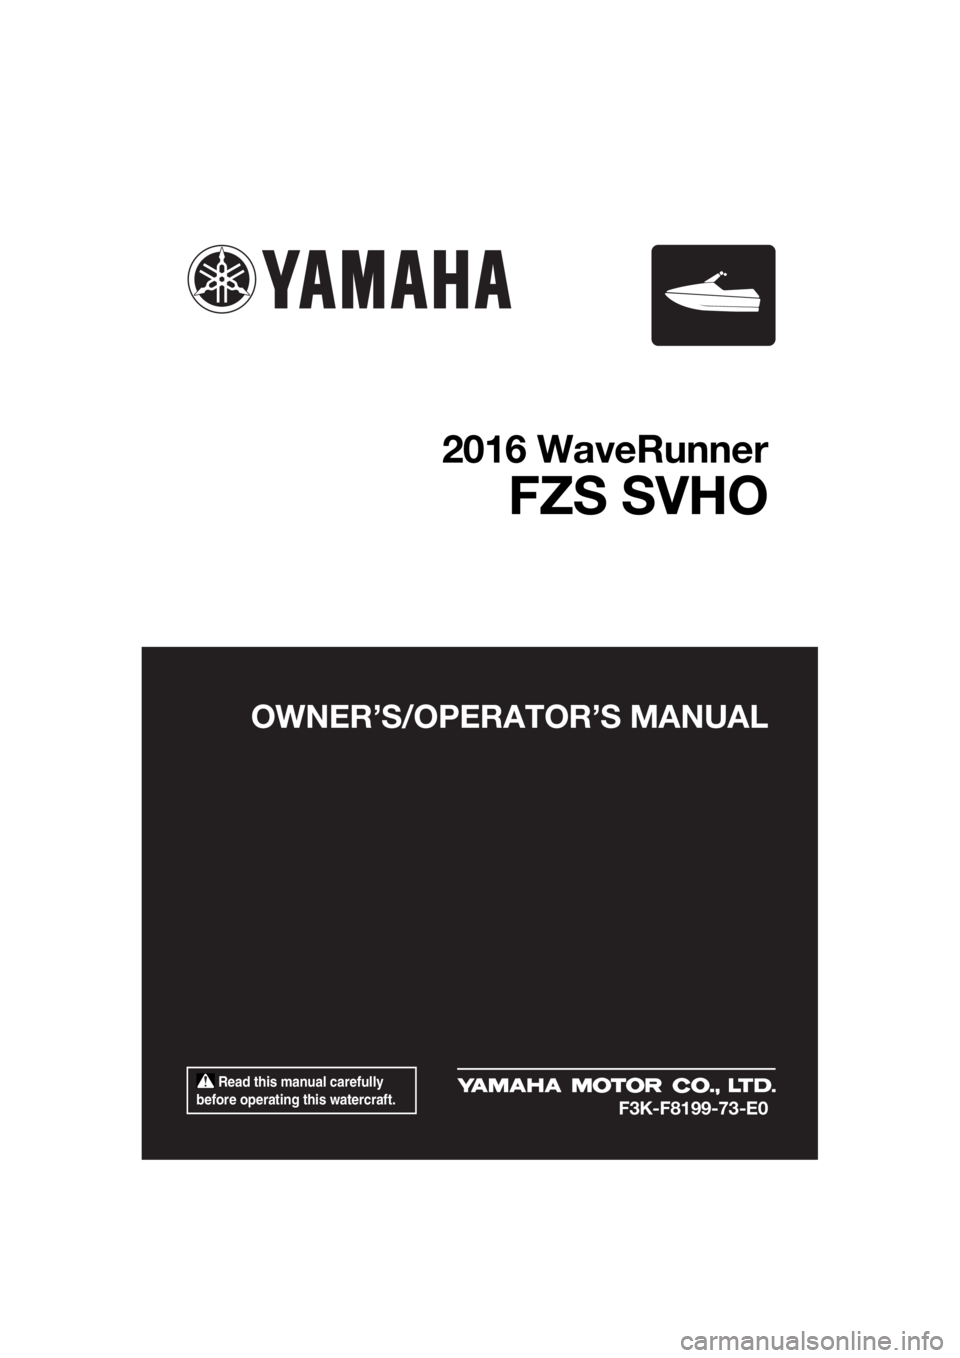 YAMAHA FZS SVHO 2016  Owners Manual  Read this manual carefully 
before operating this watercraft.
OWNER’S/OPERAT OR’S MANUAL
2016 WaveRunner
FZS SVHO
F3K-F8199-73-E0
UF3K73E0.book  Page 1  Wednesday, August 26, 2015  11:28 AM 